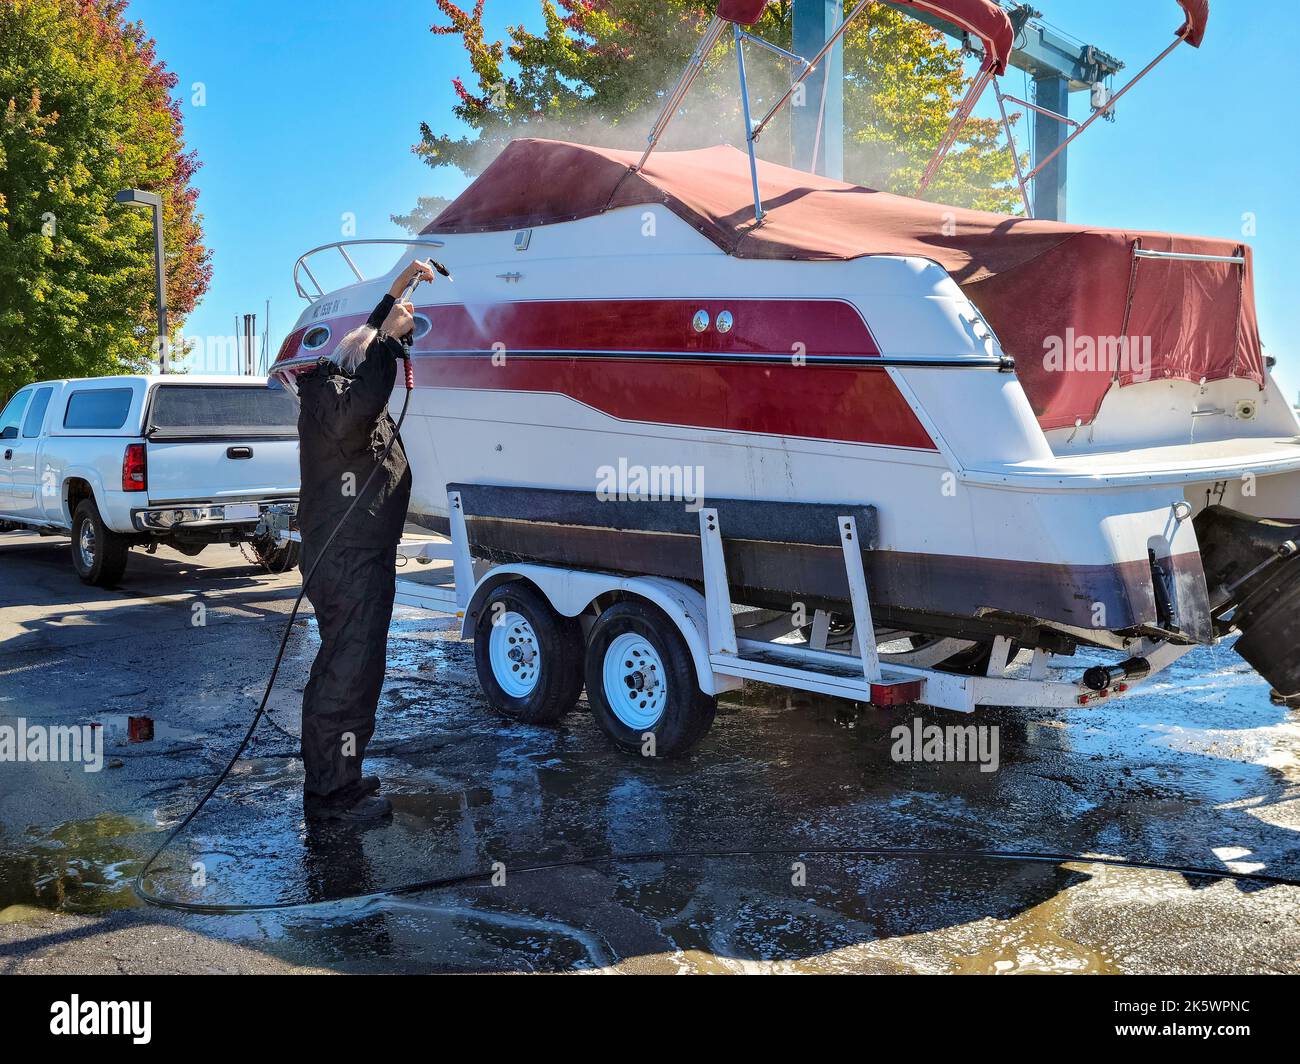 Man using a pressure washer to clean power boat on a trailer Stock Photo